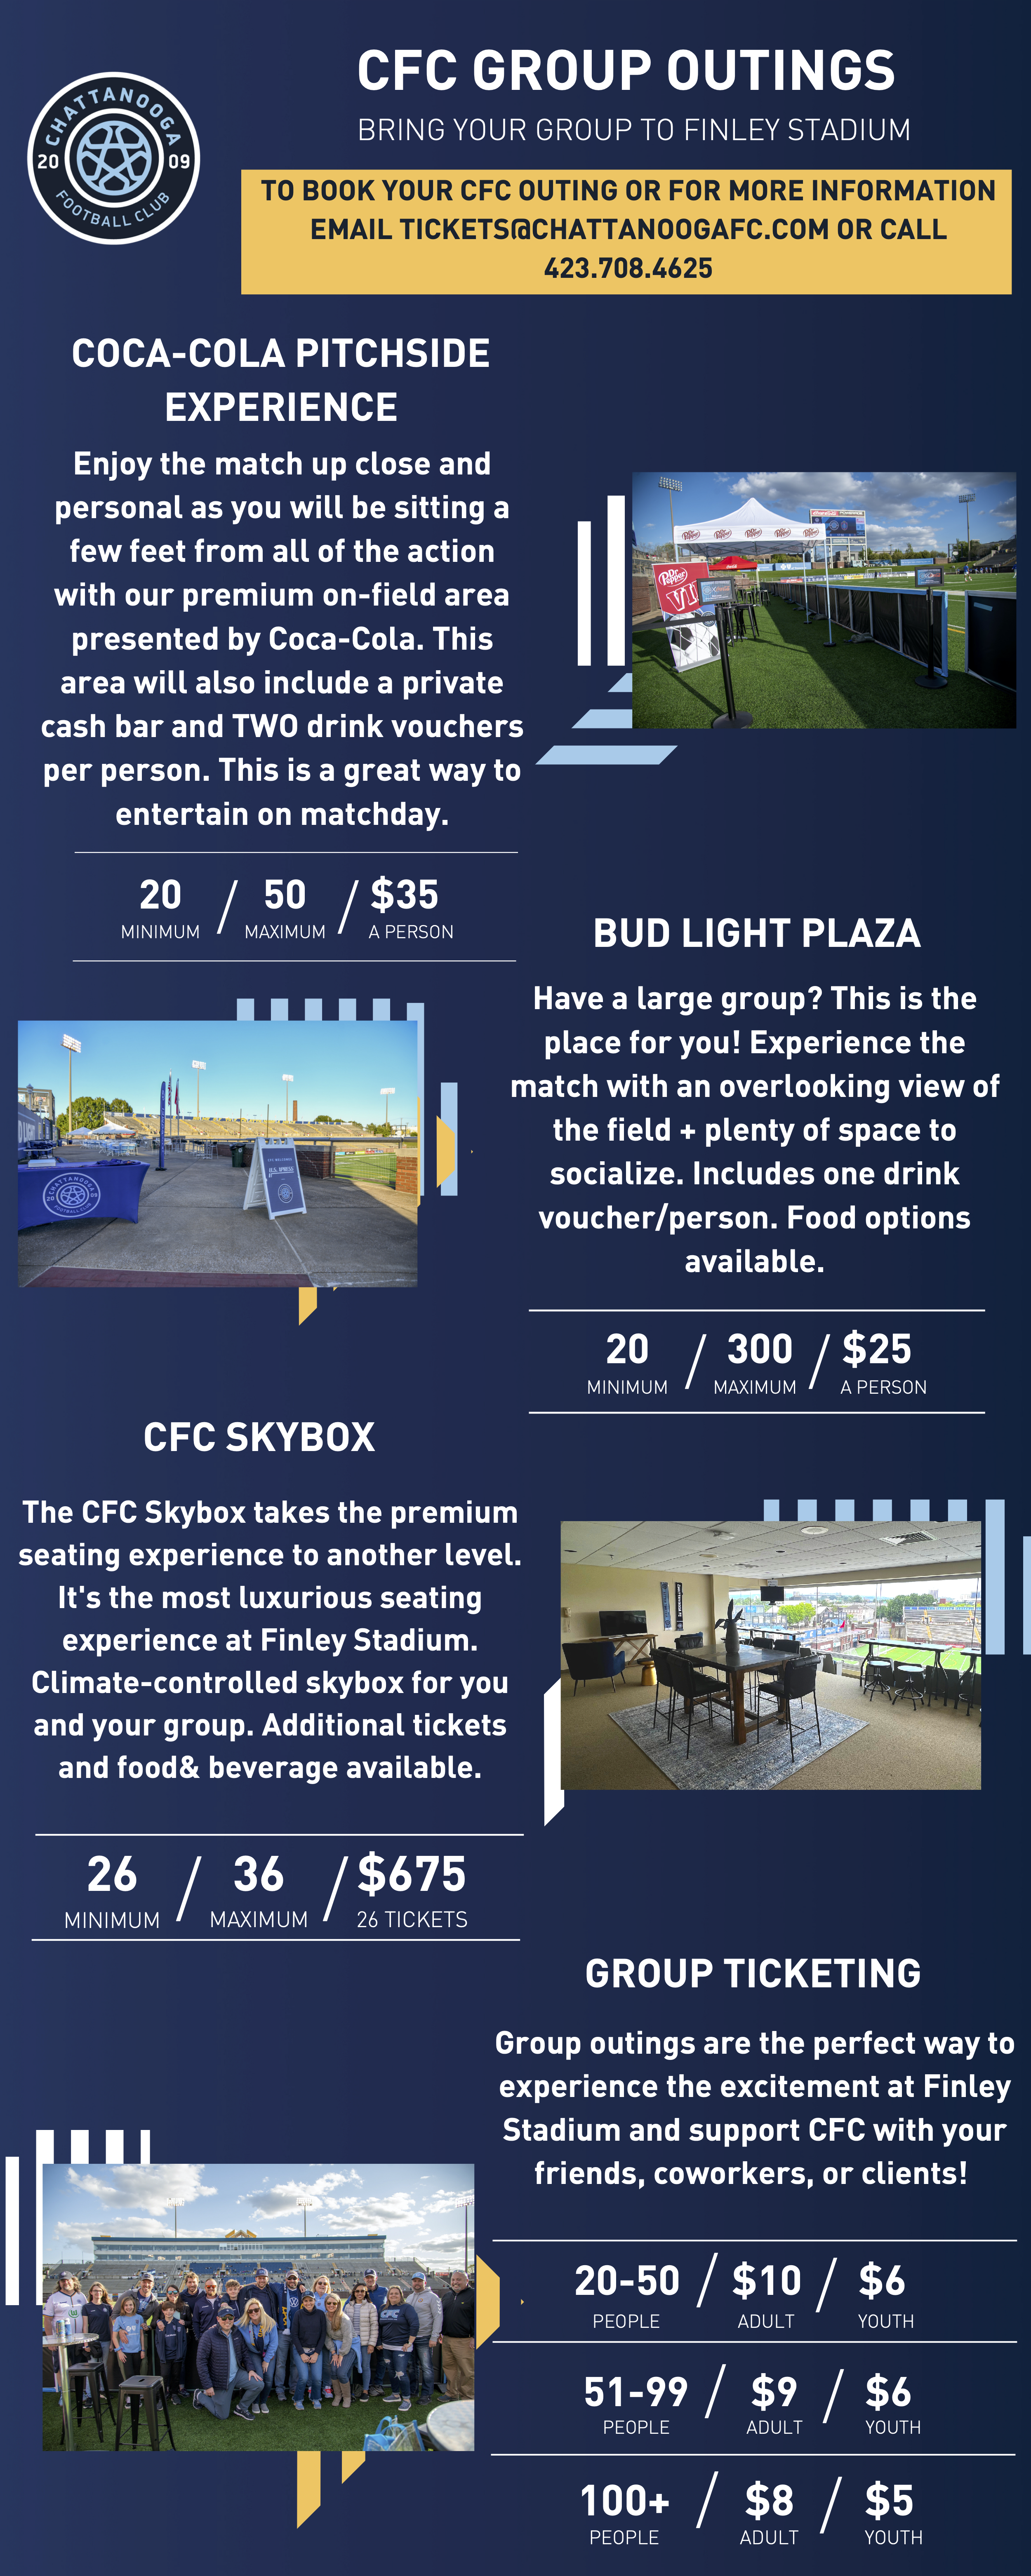 _CFC GROUP OUTINGS (Infographic)